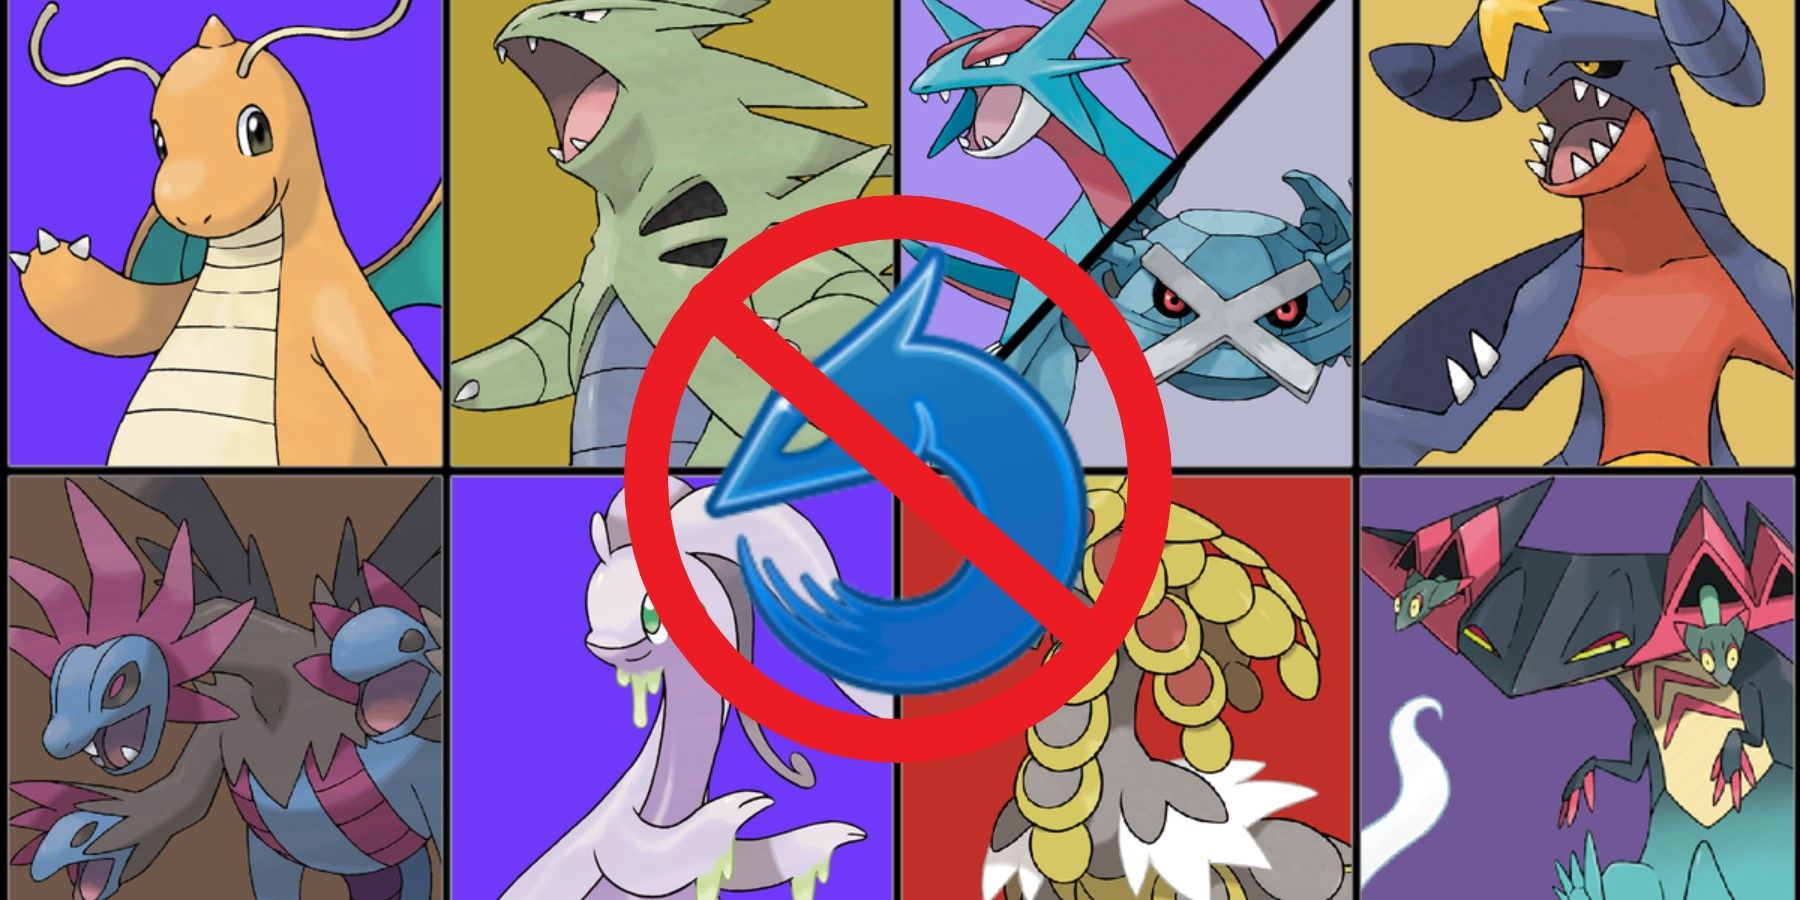 Who do you think is the best pseudo-legendary of Pokemon and why